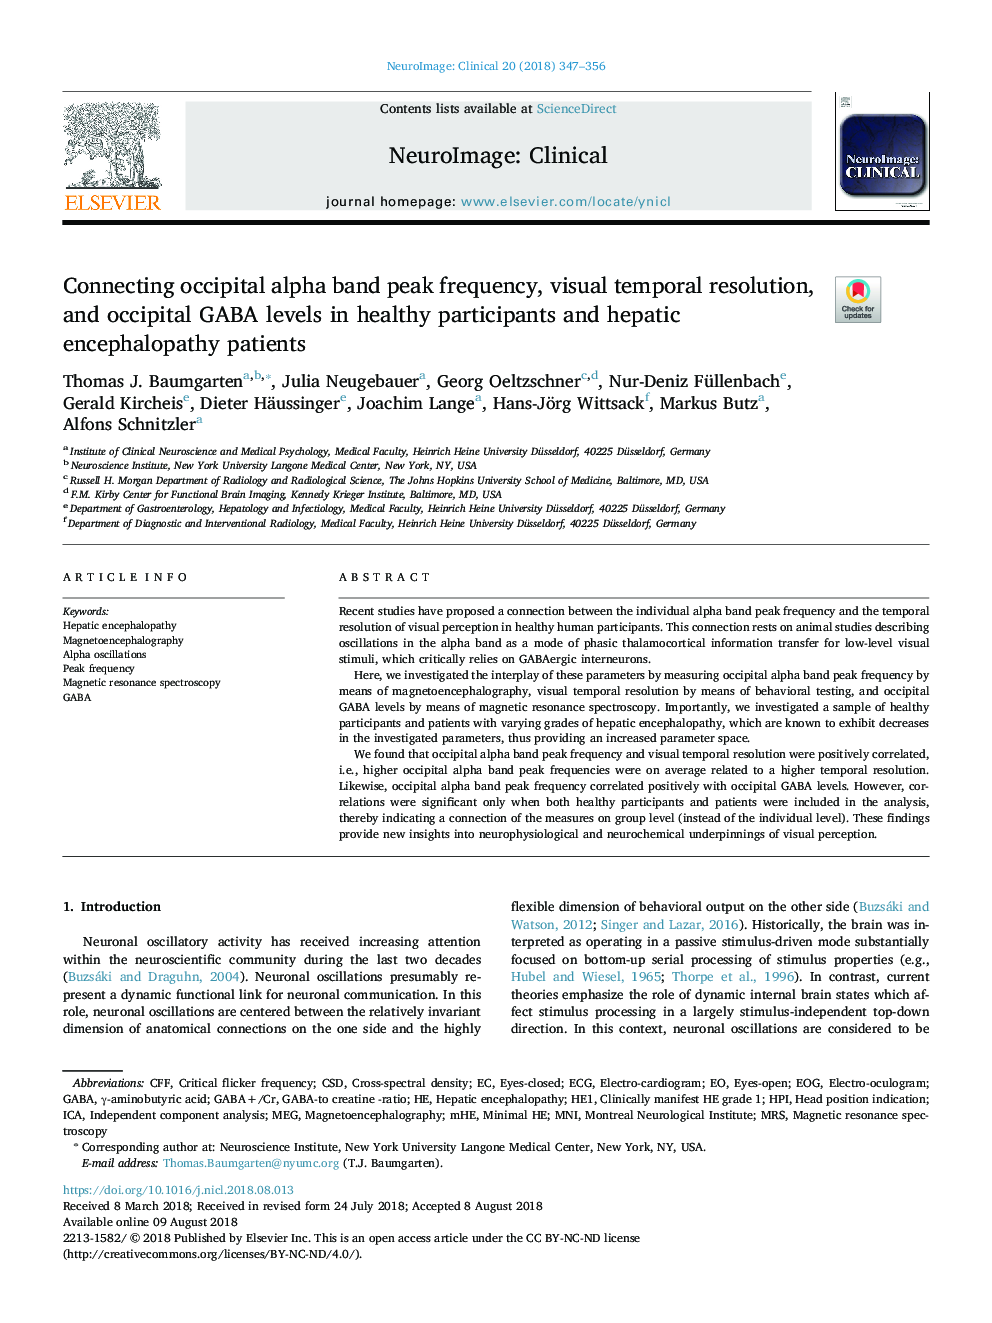 Connecting occipital alpha band peak frequency, visual temporal resolution, and occipital GABA levels in healthy participants and hepatic encephalopathy patients